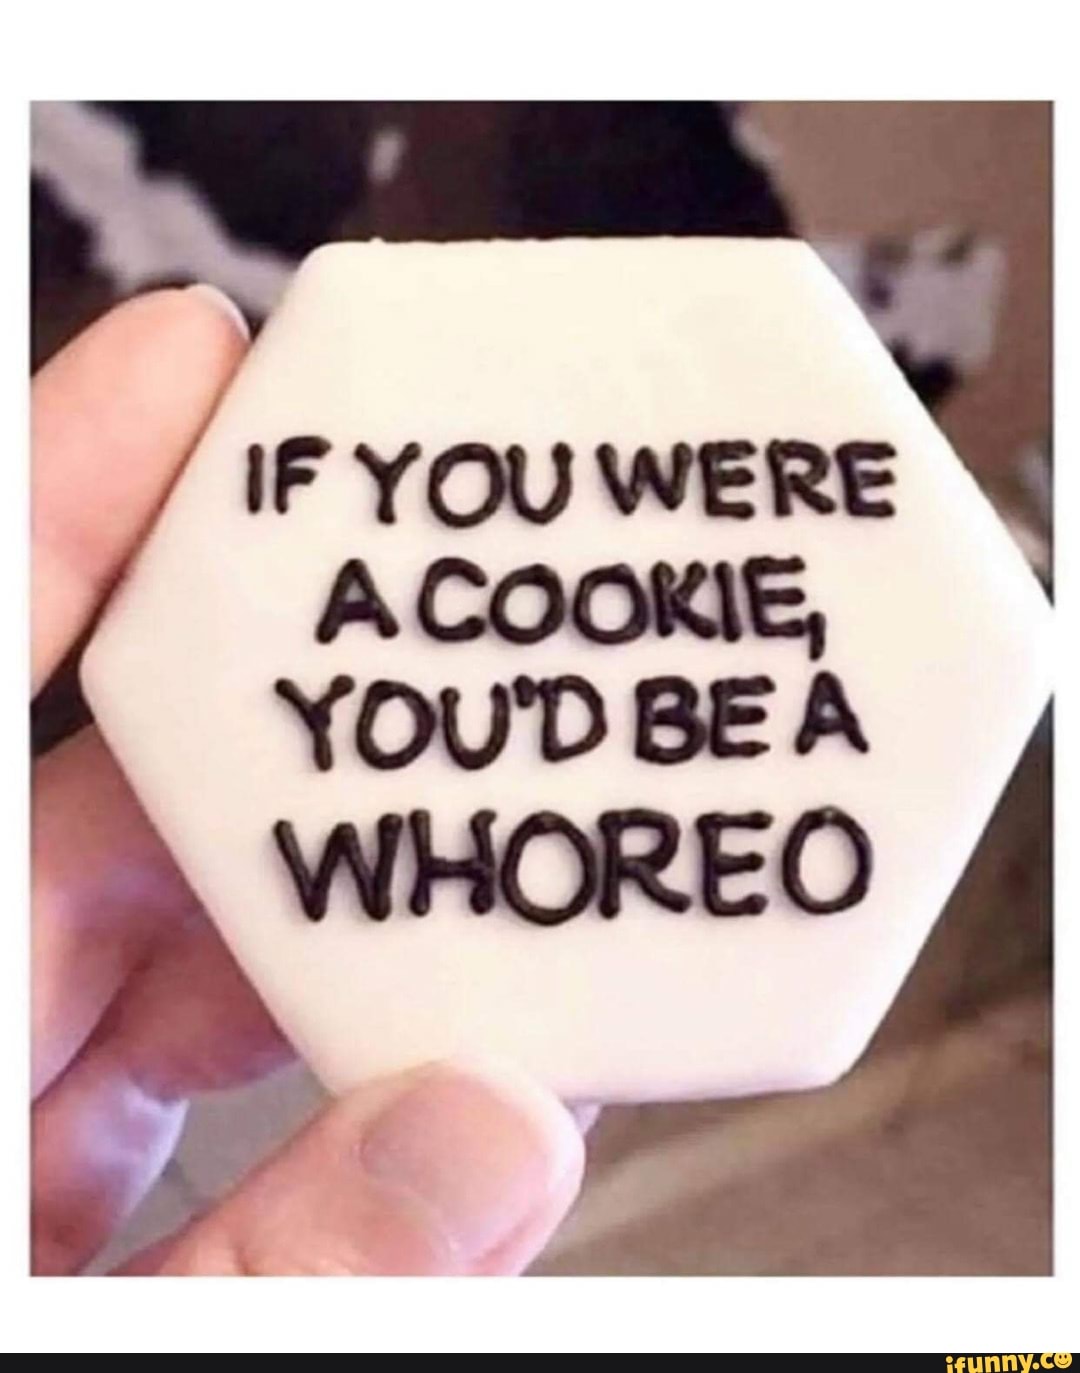 IF YOU WERE A COOKIE, YOu'D BE A WHOREO - iFunny